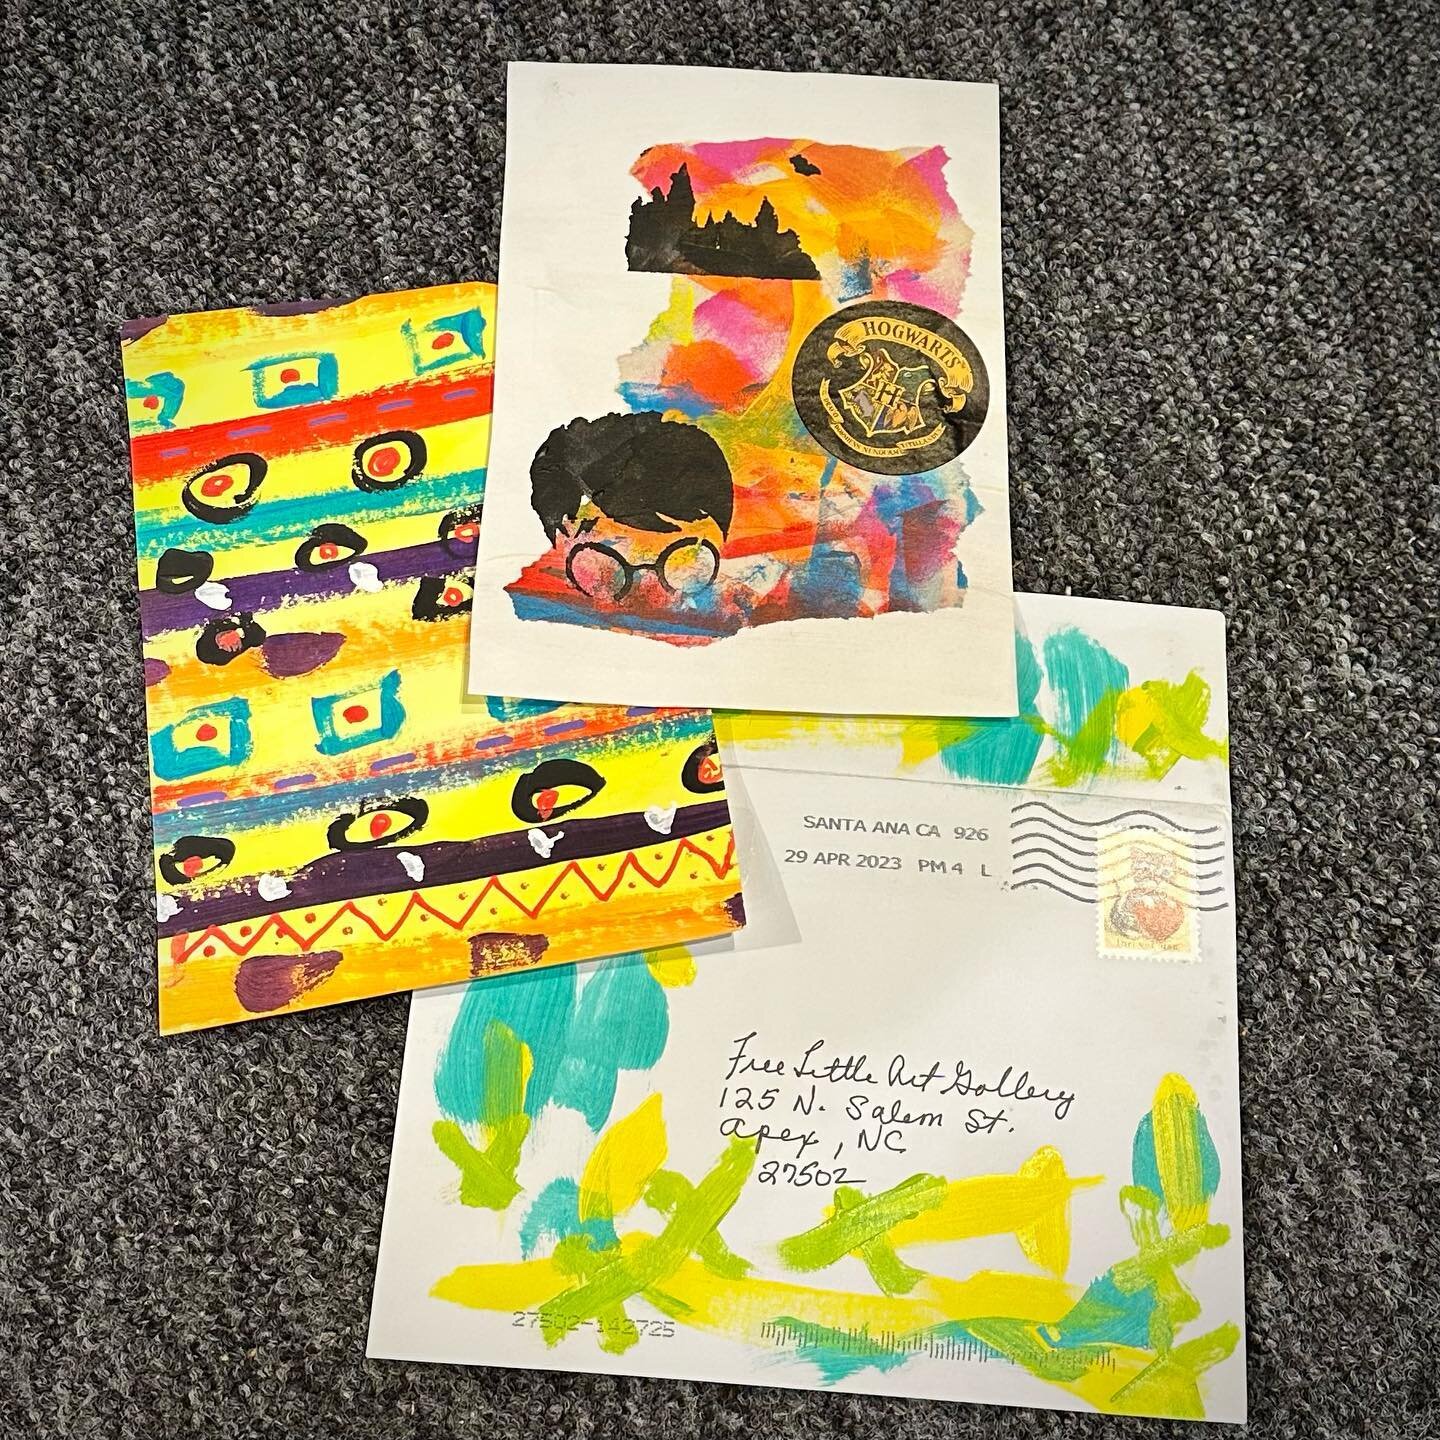 Thanks to Sharon @sgermick for the #flagmail from California! We are so excited to get art mail from across the country ✉️ We love your vibrant colors and #harrypotter piece! Thanks a million from Apex, NC!